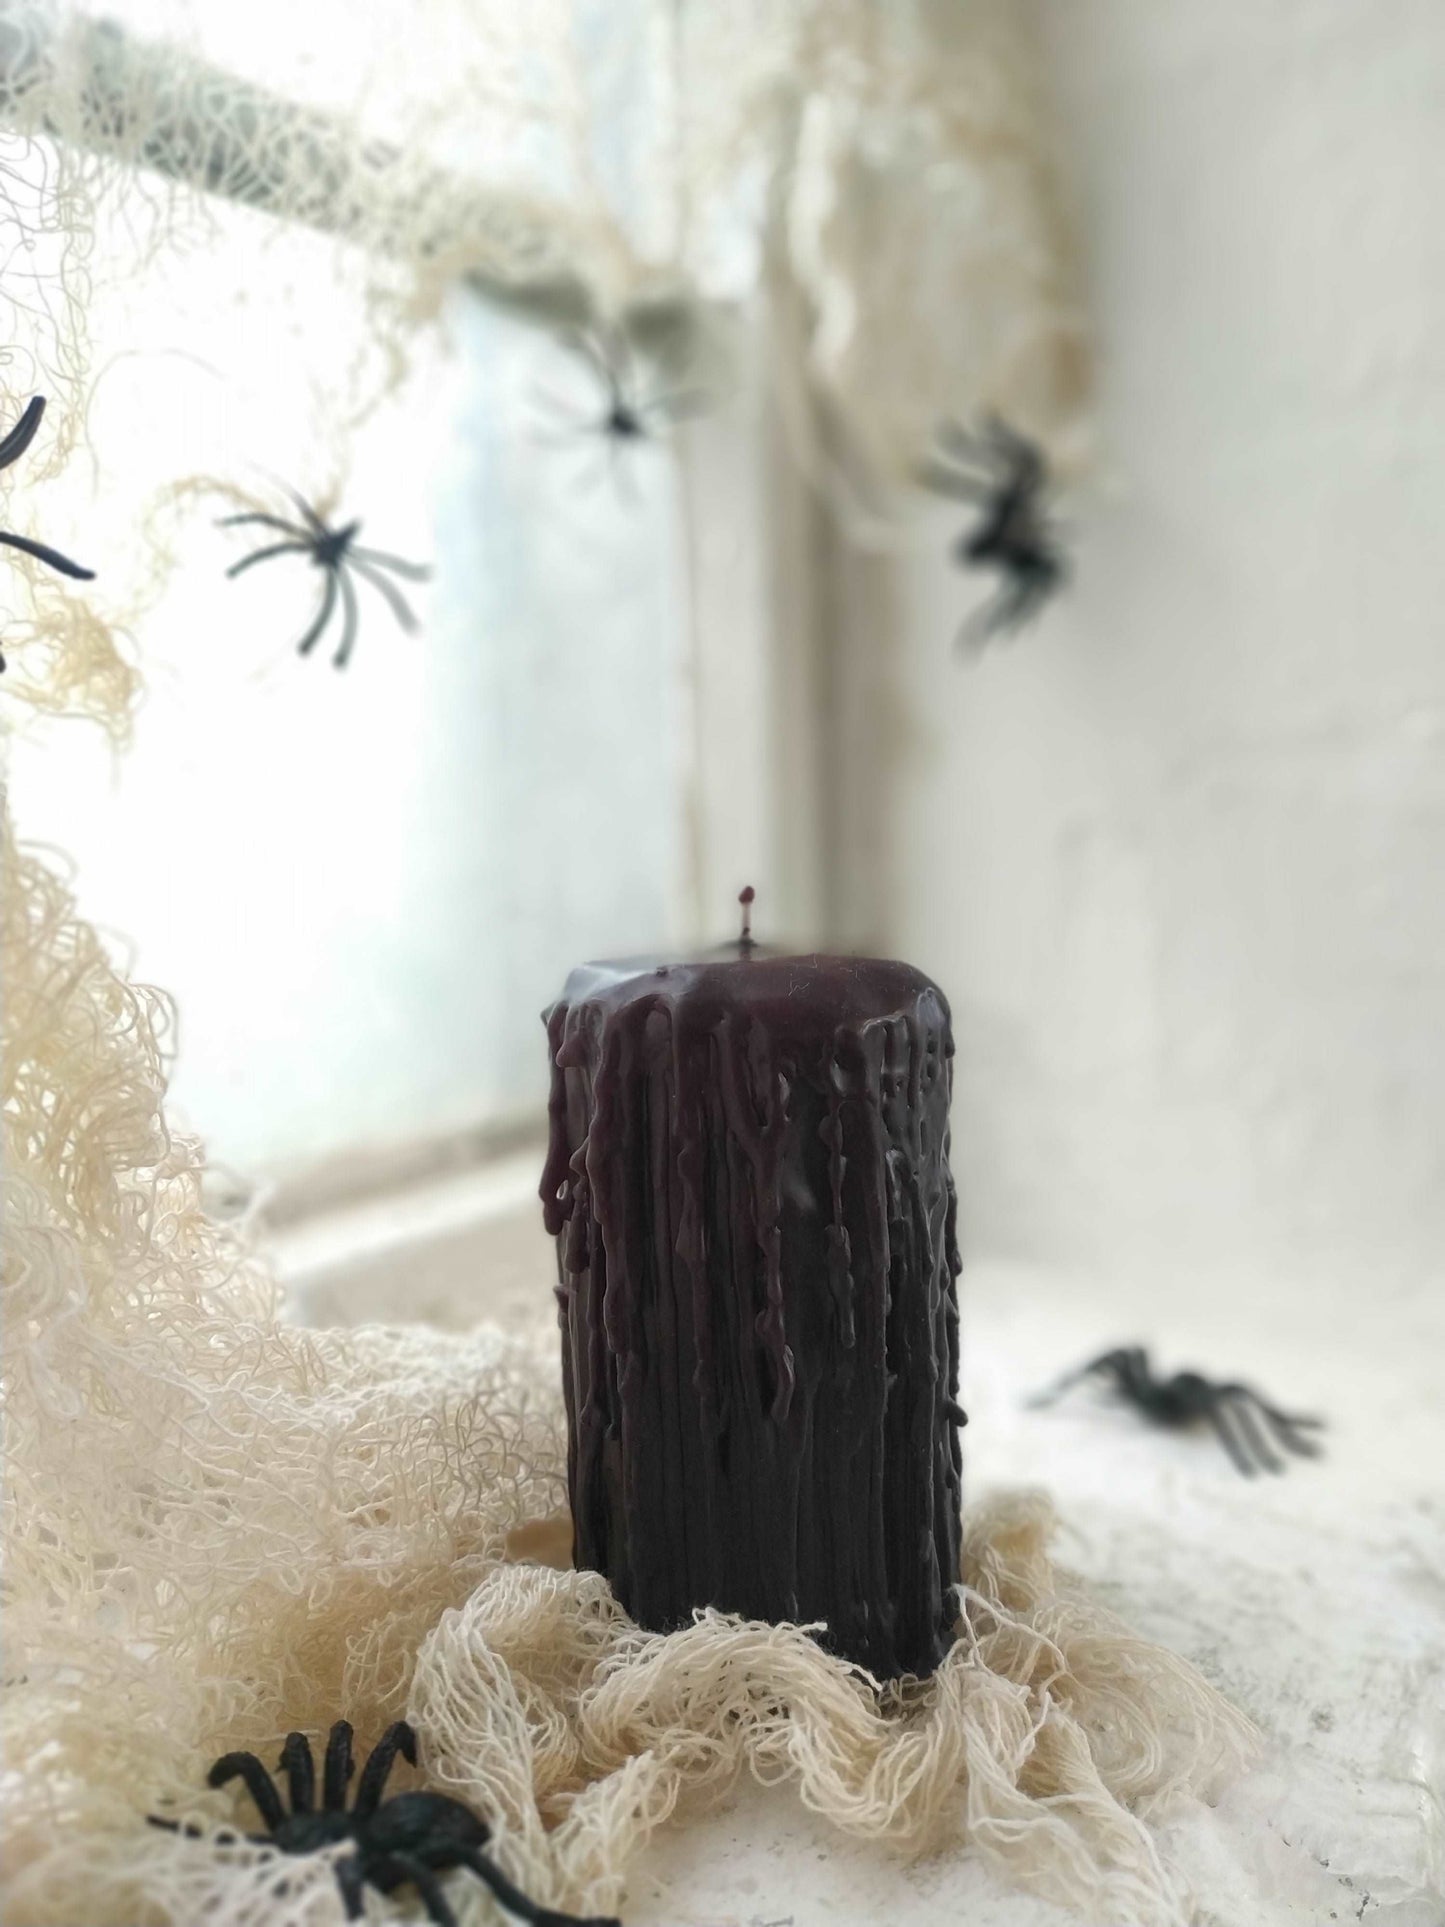 halloween candles, spiders, Black Beeswax Hand Dripped Pillar Candles, 100% pure beeswax candle, unique, unusual candles, spell, halloween, hand dripped, black decor